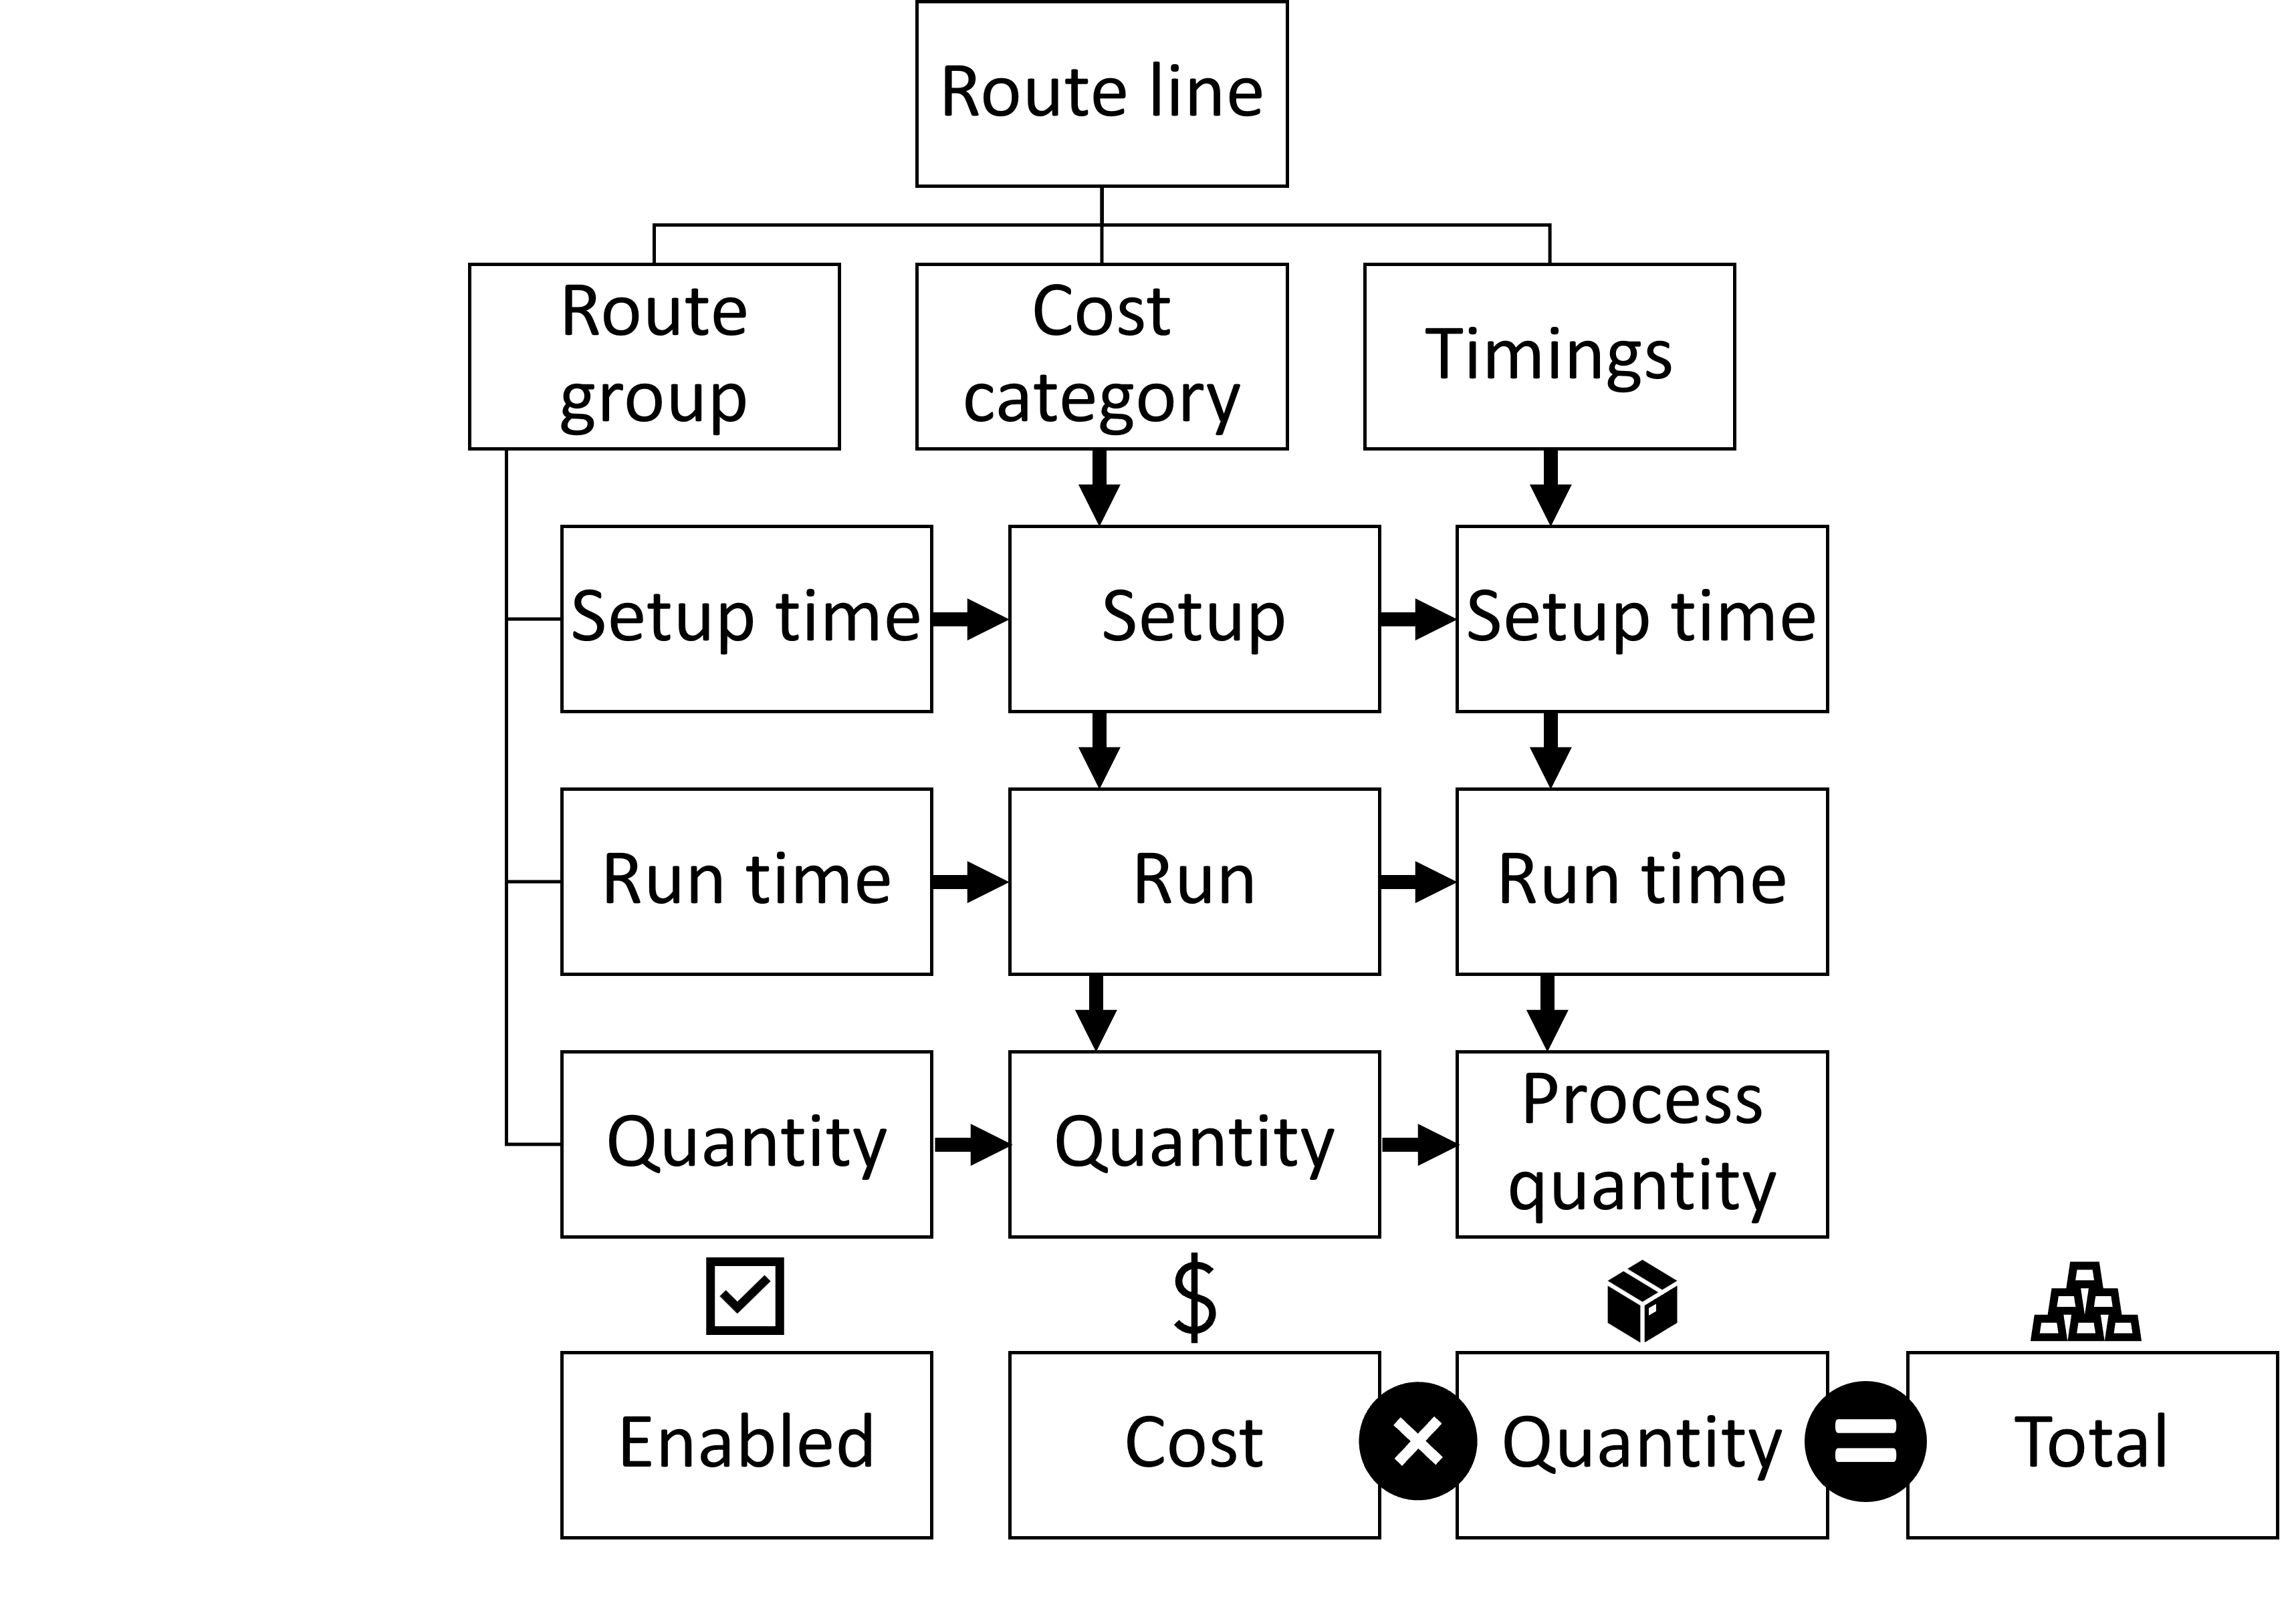 The relationship of route groups to the total calculated cost.